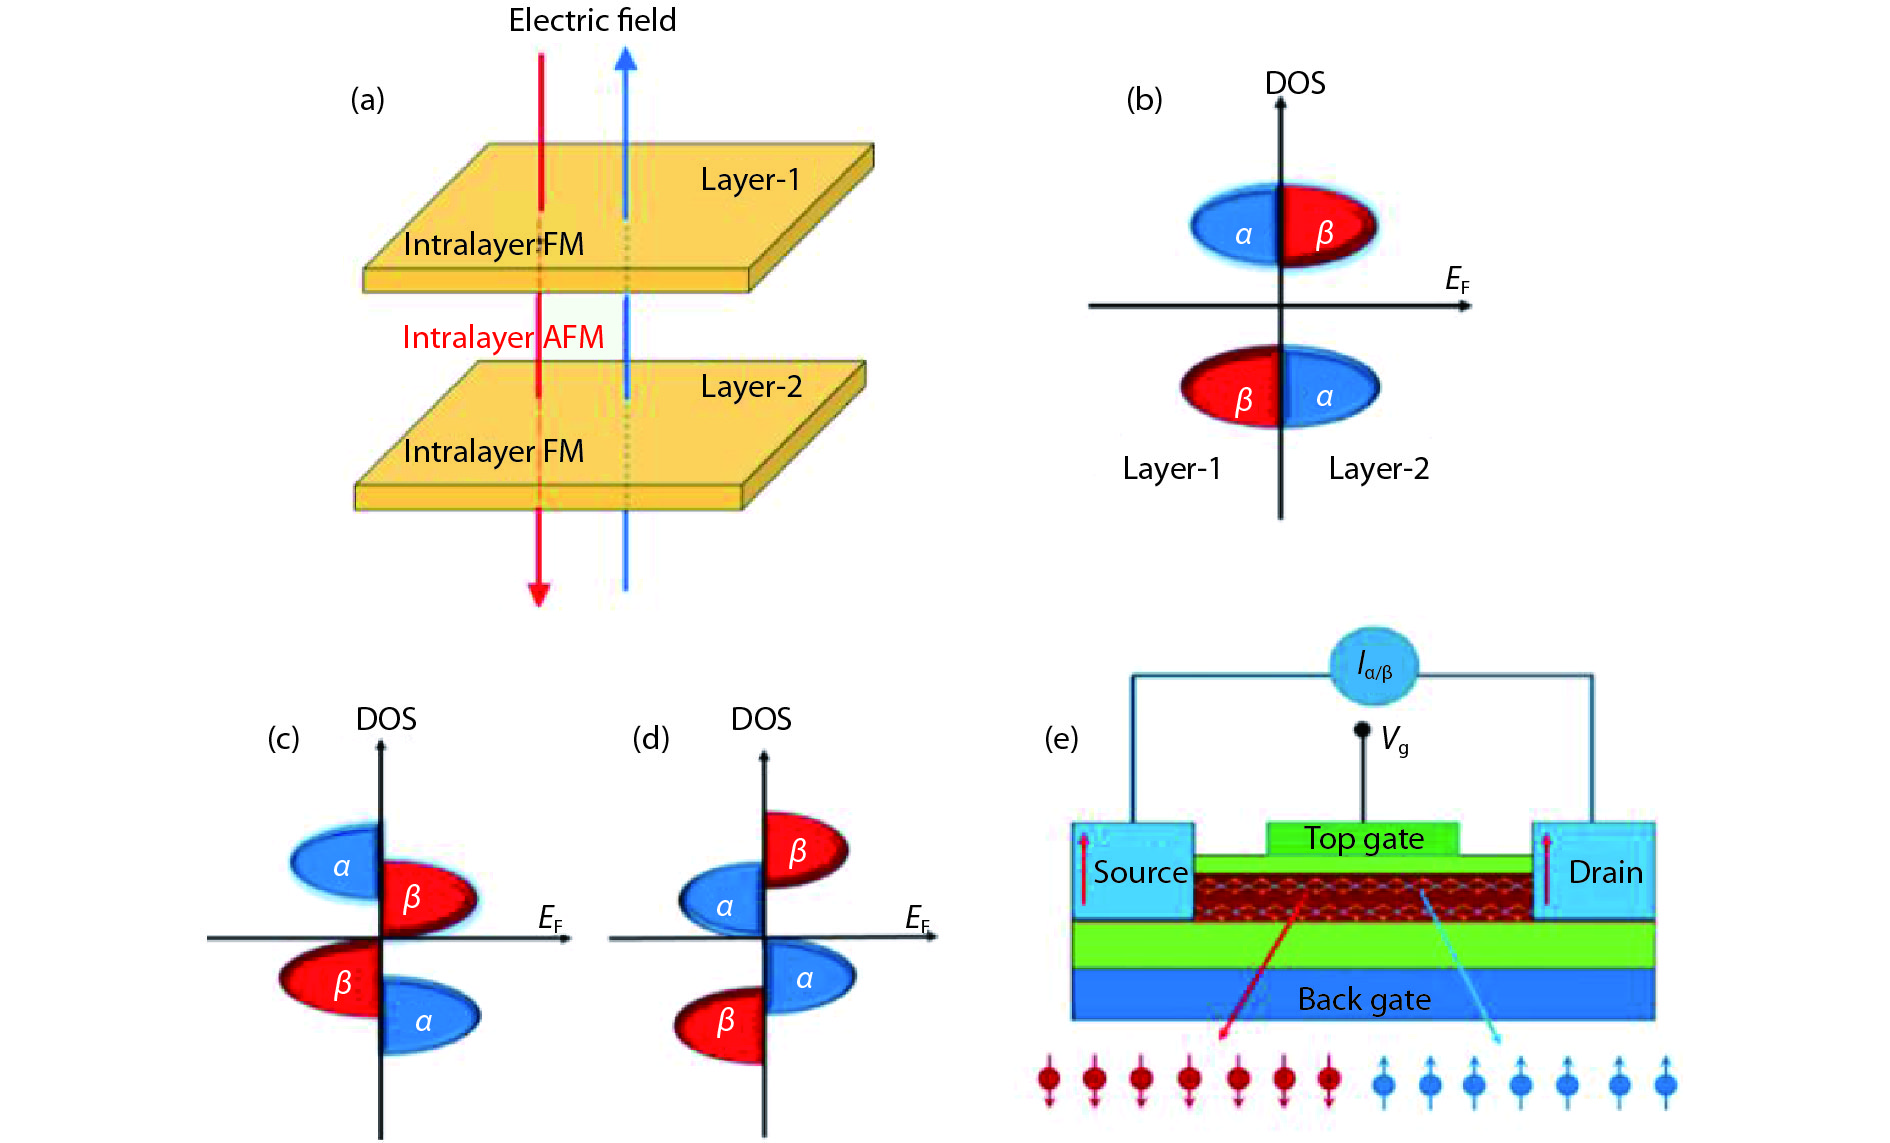 (Color online) (a) Schematic view of the A-type antiferromagnetic bilayer system with the perpendicular electric field shown in blue (positve) and red (negative). (b−d) The schematic spin- and layer-resolved density of states of the A-type antiferromagnetic bilayer system with the electric field normal to the van der Waals plane (b) E = 0 and (c) (d) E = Ec (Ec is the critical electric field for the emergence of half metallicity), in which 1-α(β) and 2-α(β) indicate the spin-α(β) channel in layer 1 and layer 2, respectively. The positive(negative) electric field induces the spin-α(β) electrons around the Fermi level. (e) The proposed spin field effect transistor model, in which the spin states in the channel are tuned by the gate voltage[2].